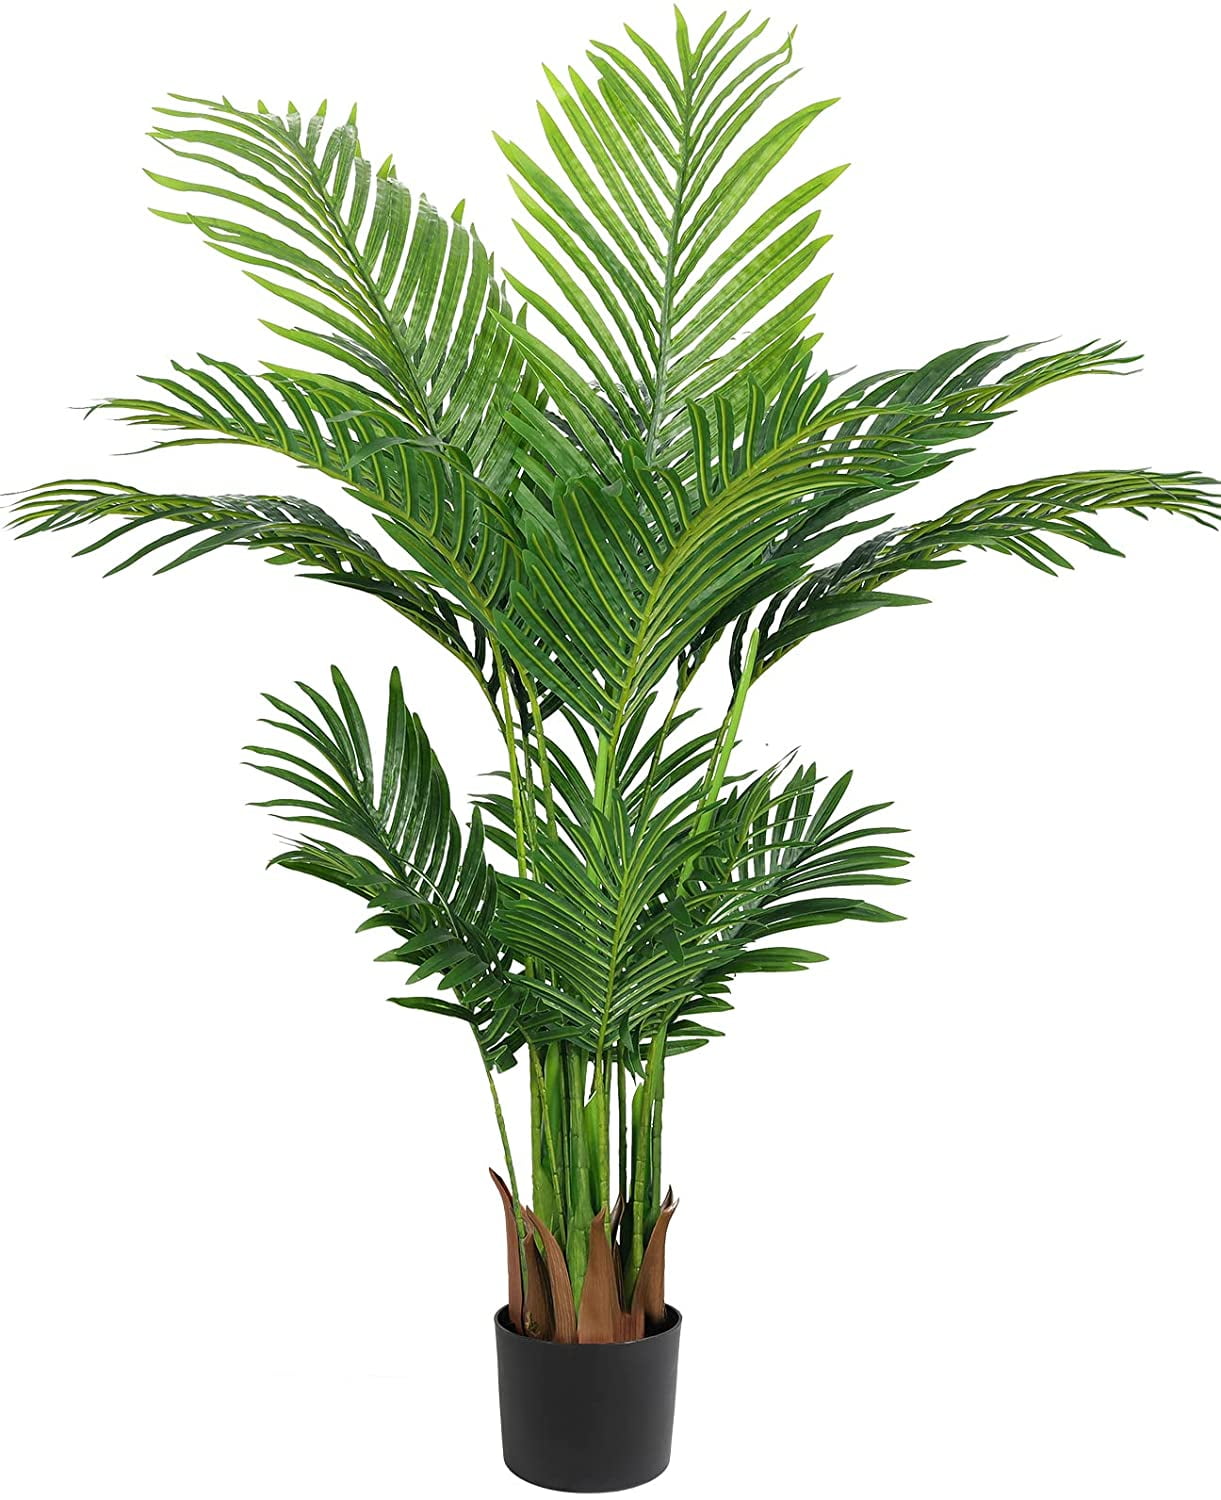 artificial kentia palm tree 4ft tall fake palm tree decor with 15 trunks  faux tropical palm silk plant